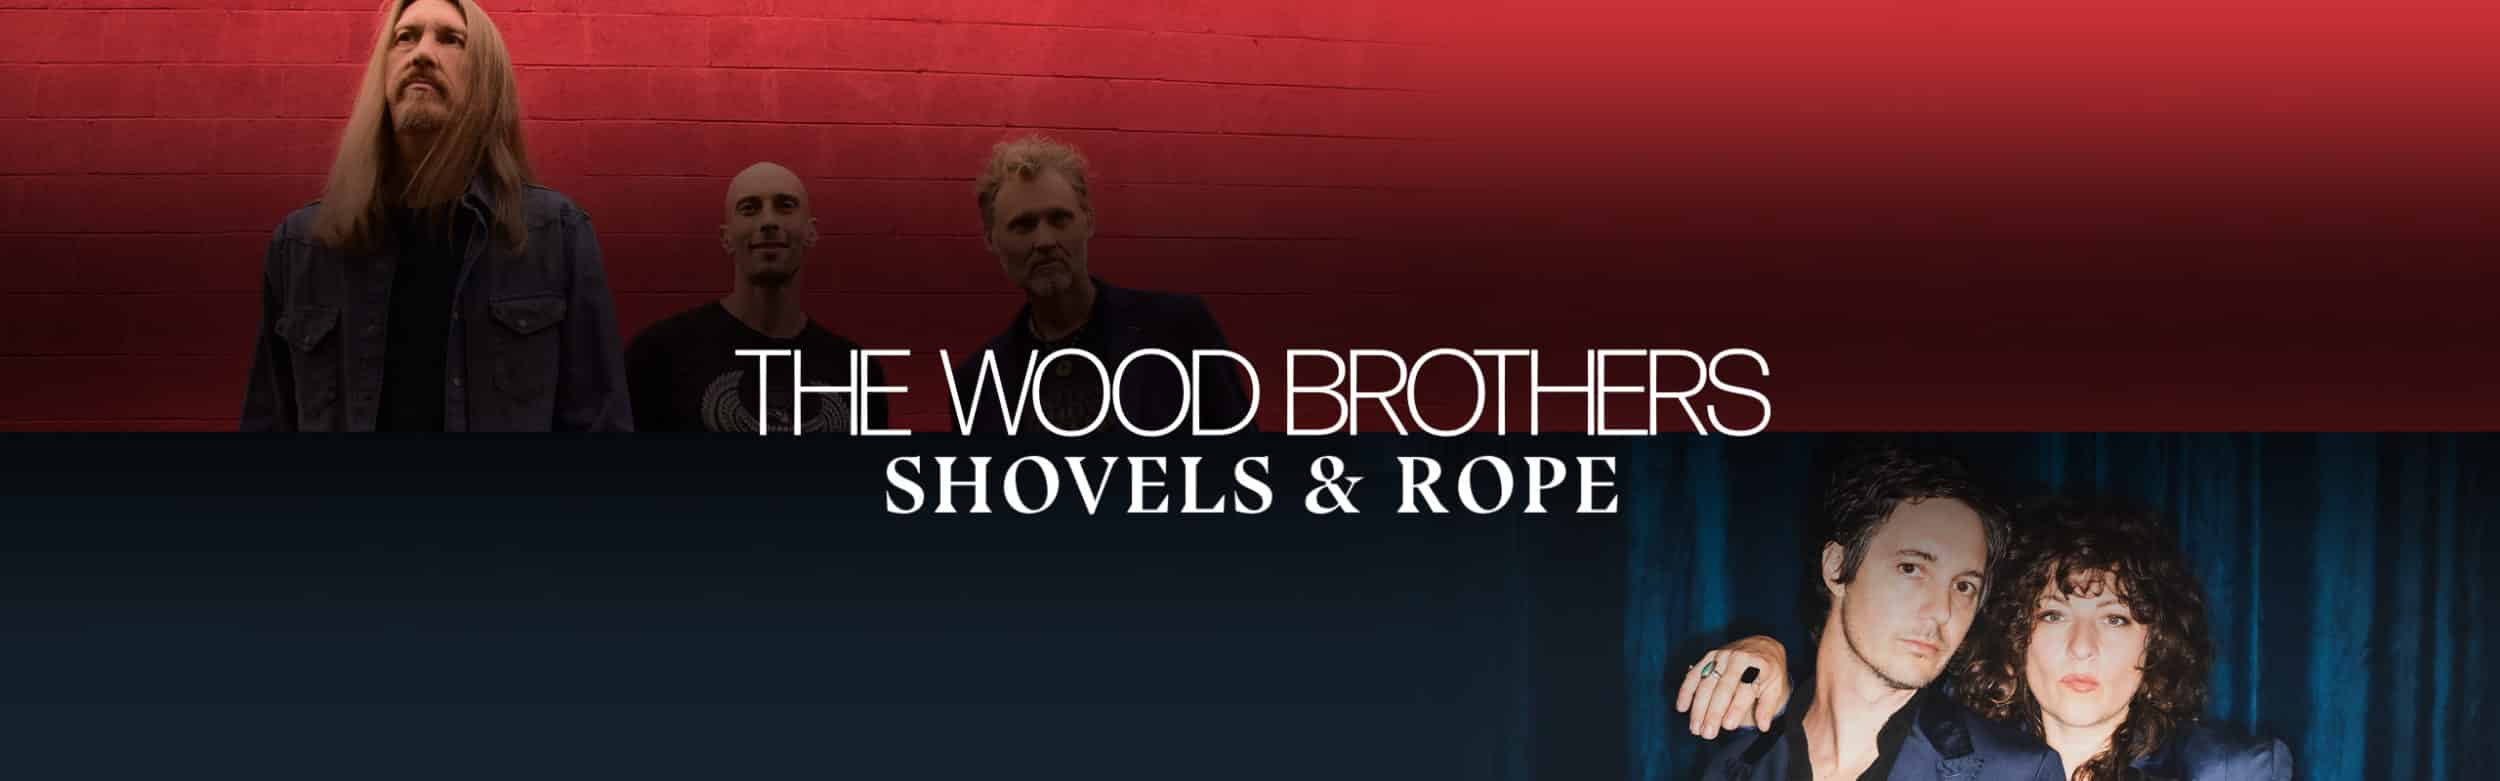 The Wood Brothers with Shovels & Rope